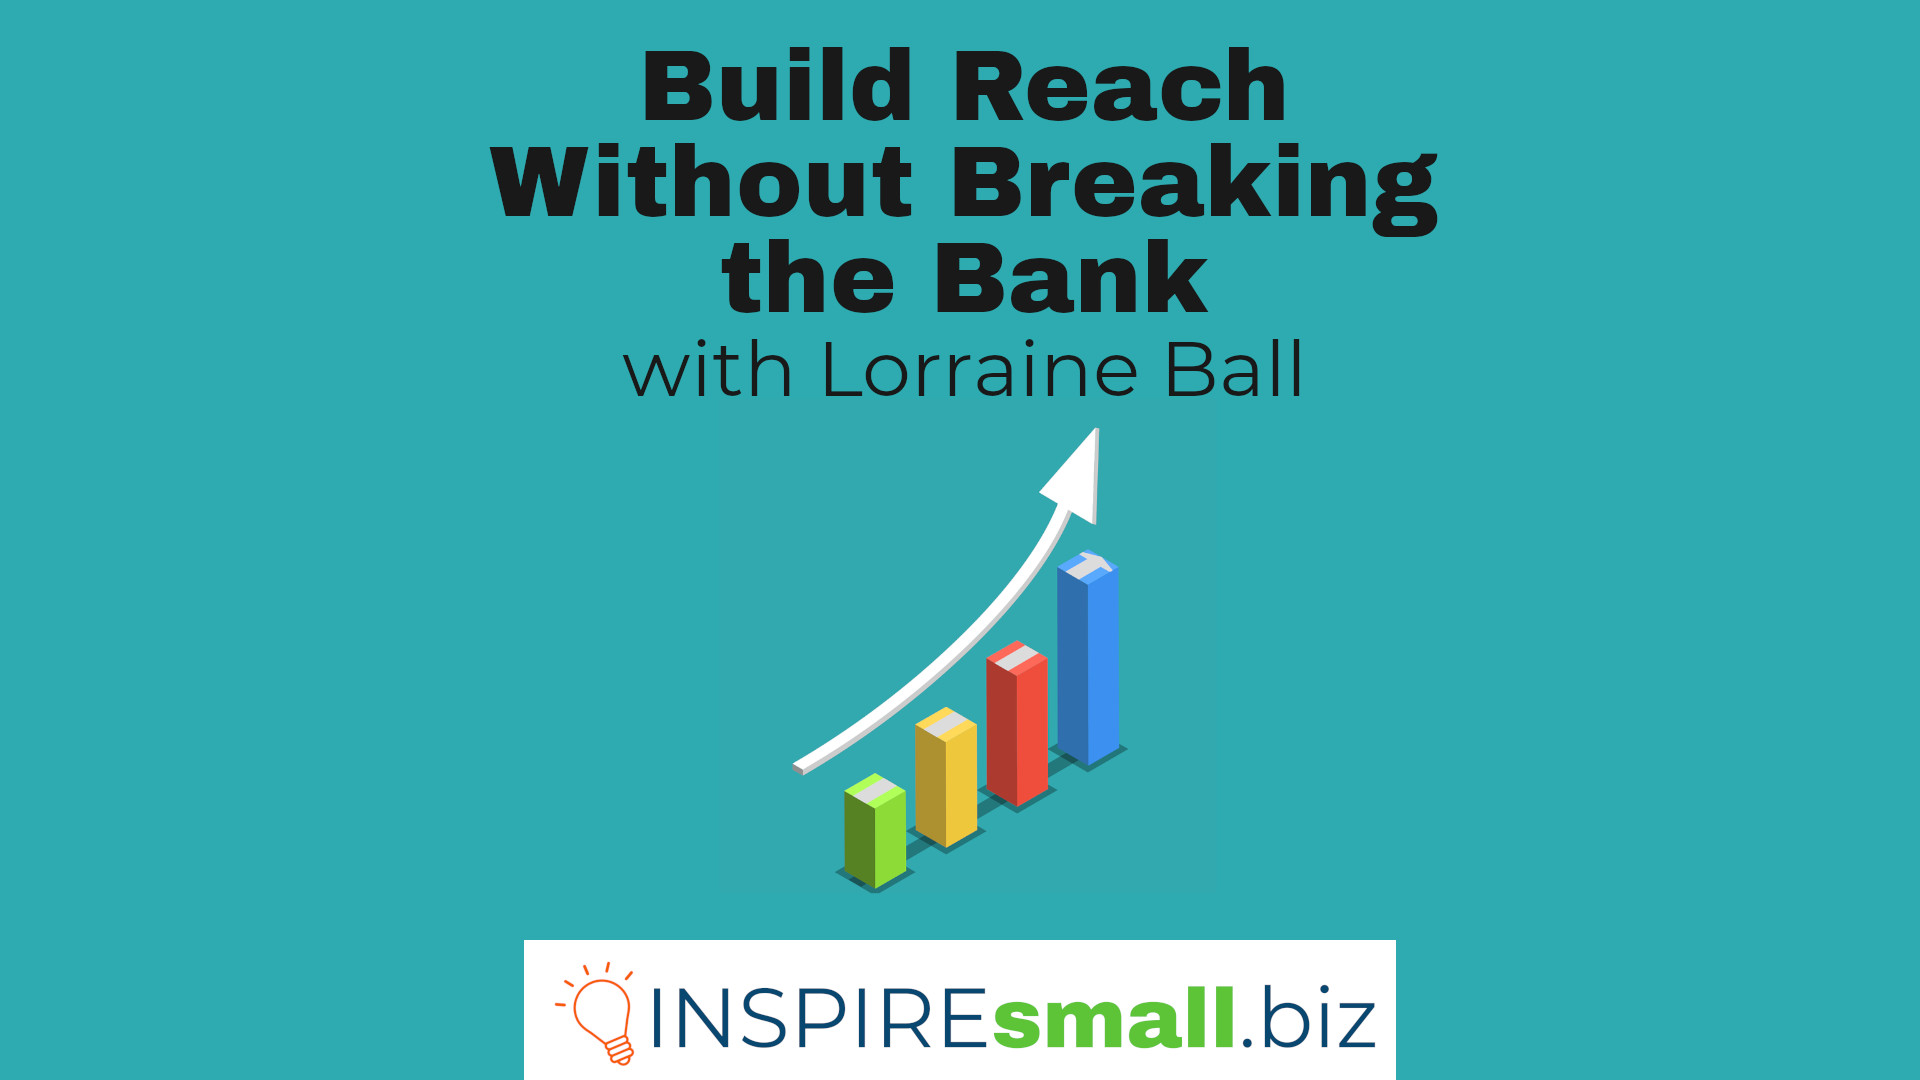 Build Reach Without Breaking the Bank – Week of March 20, 2023 Events